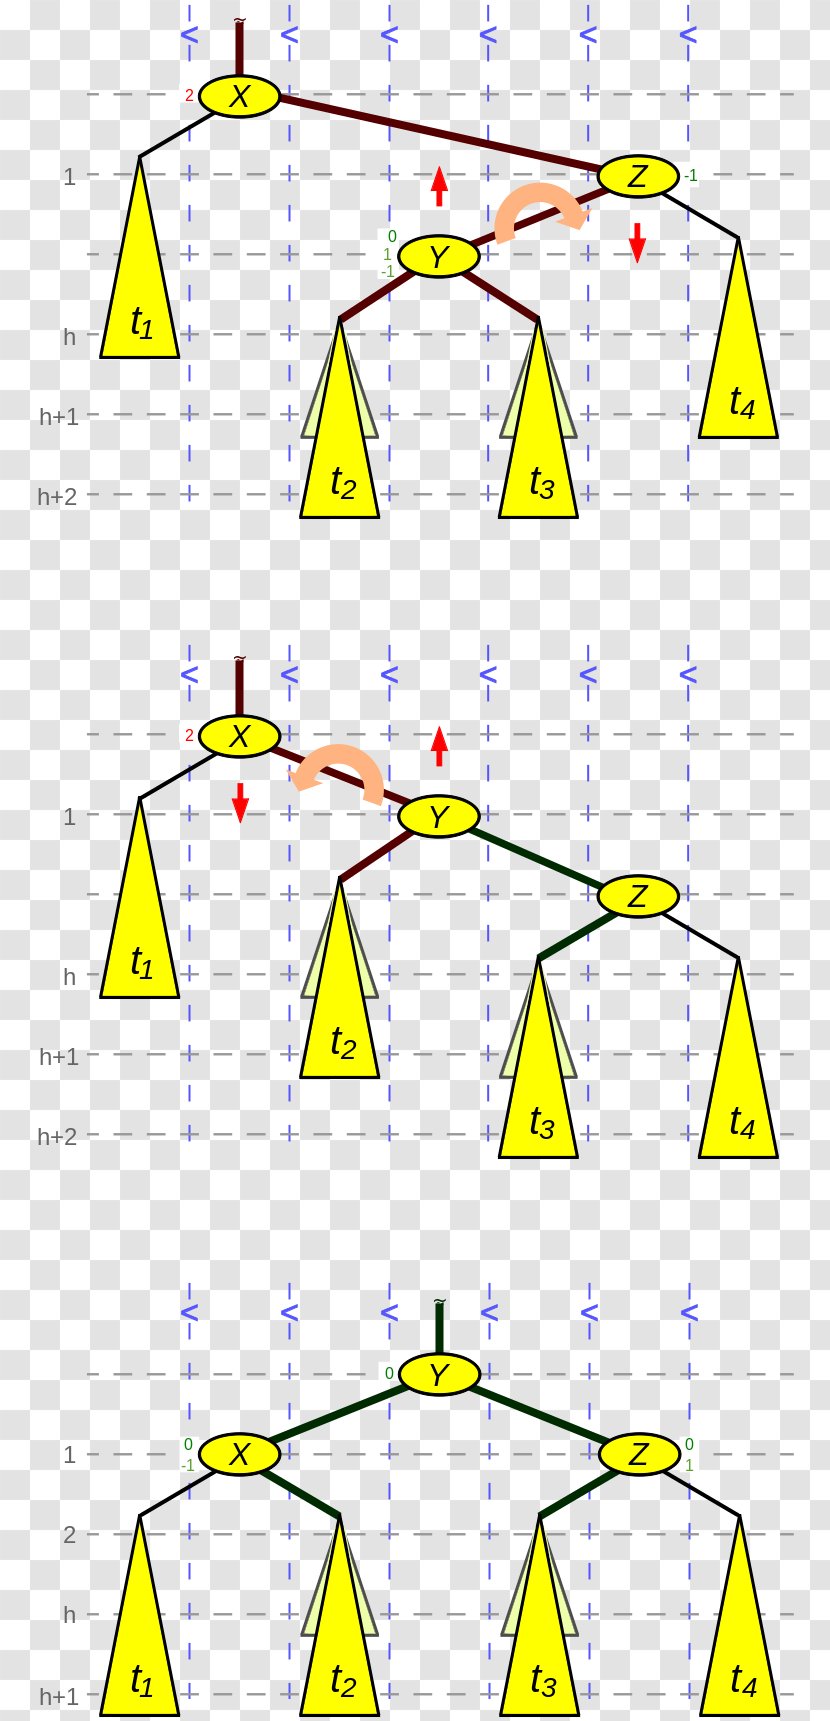 AVL Tree Computer Science Binary Search Algorithm - Yellow Transparent PNG